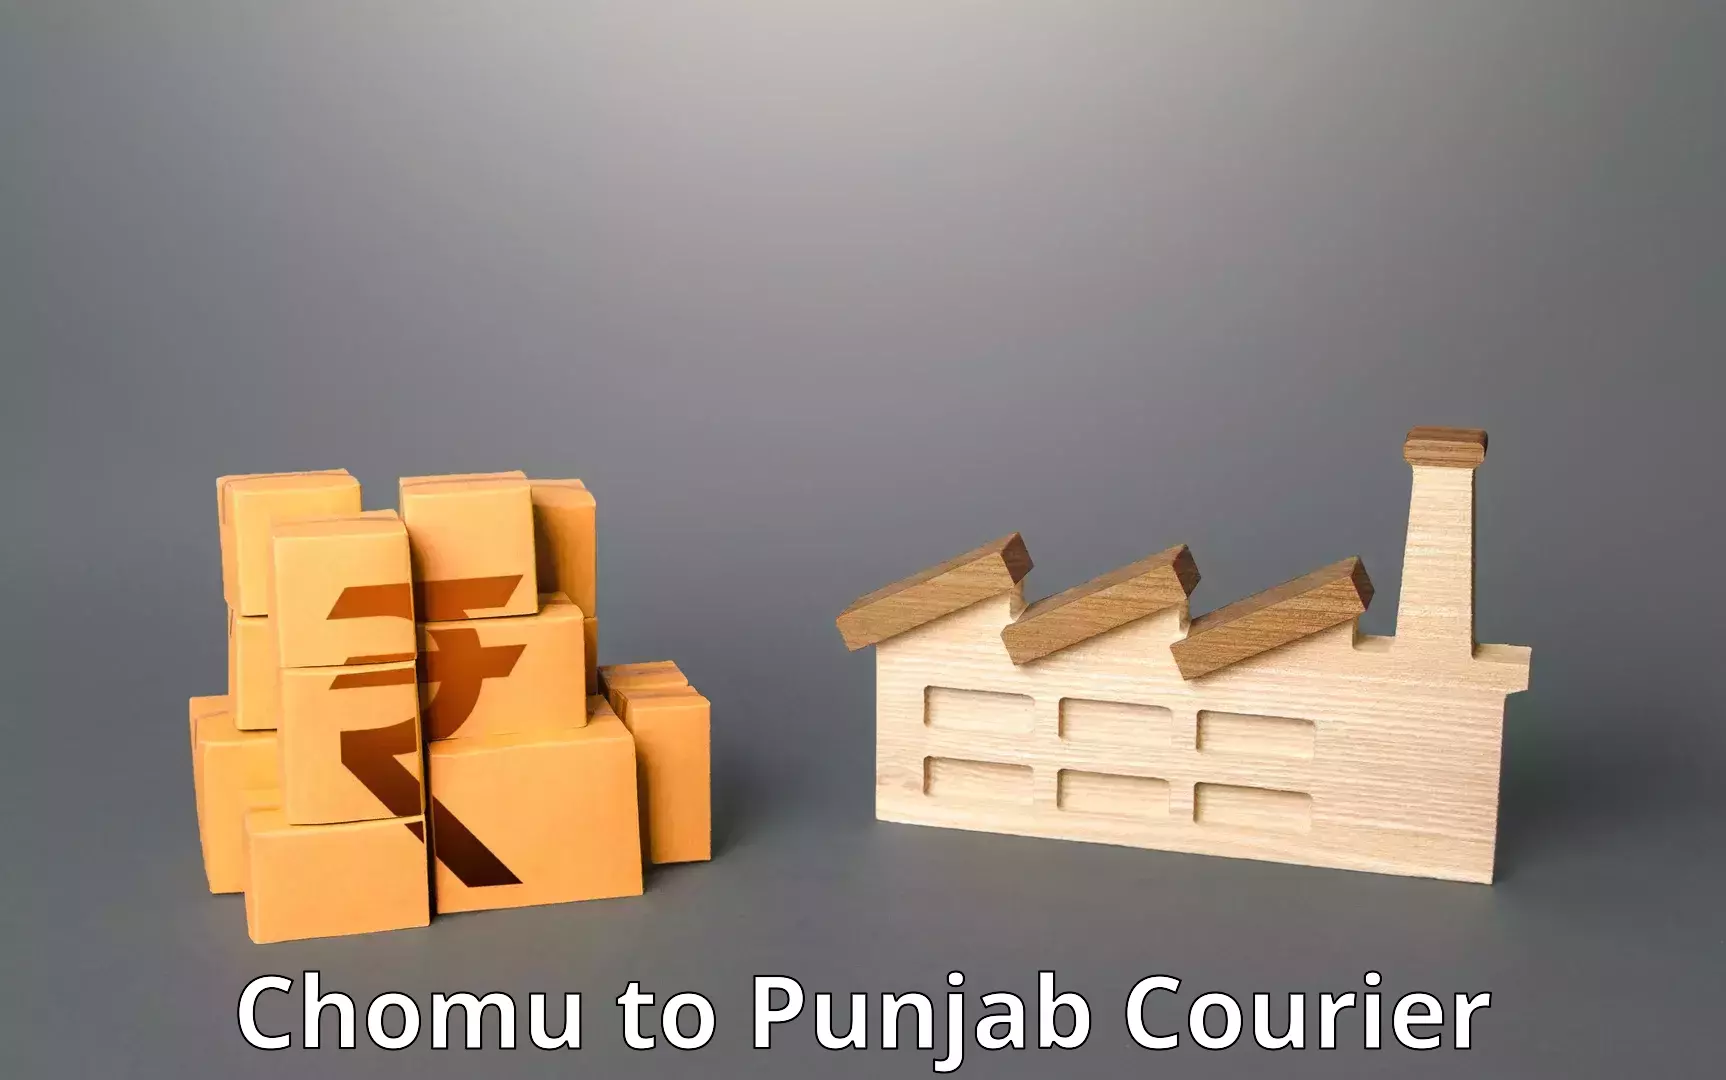 Next-day freight services Chomu to Punjab